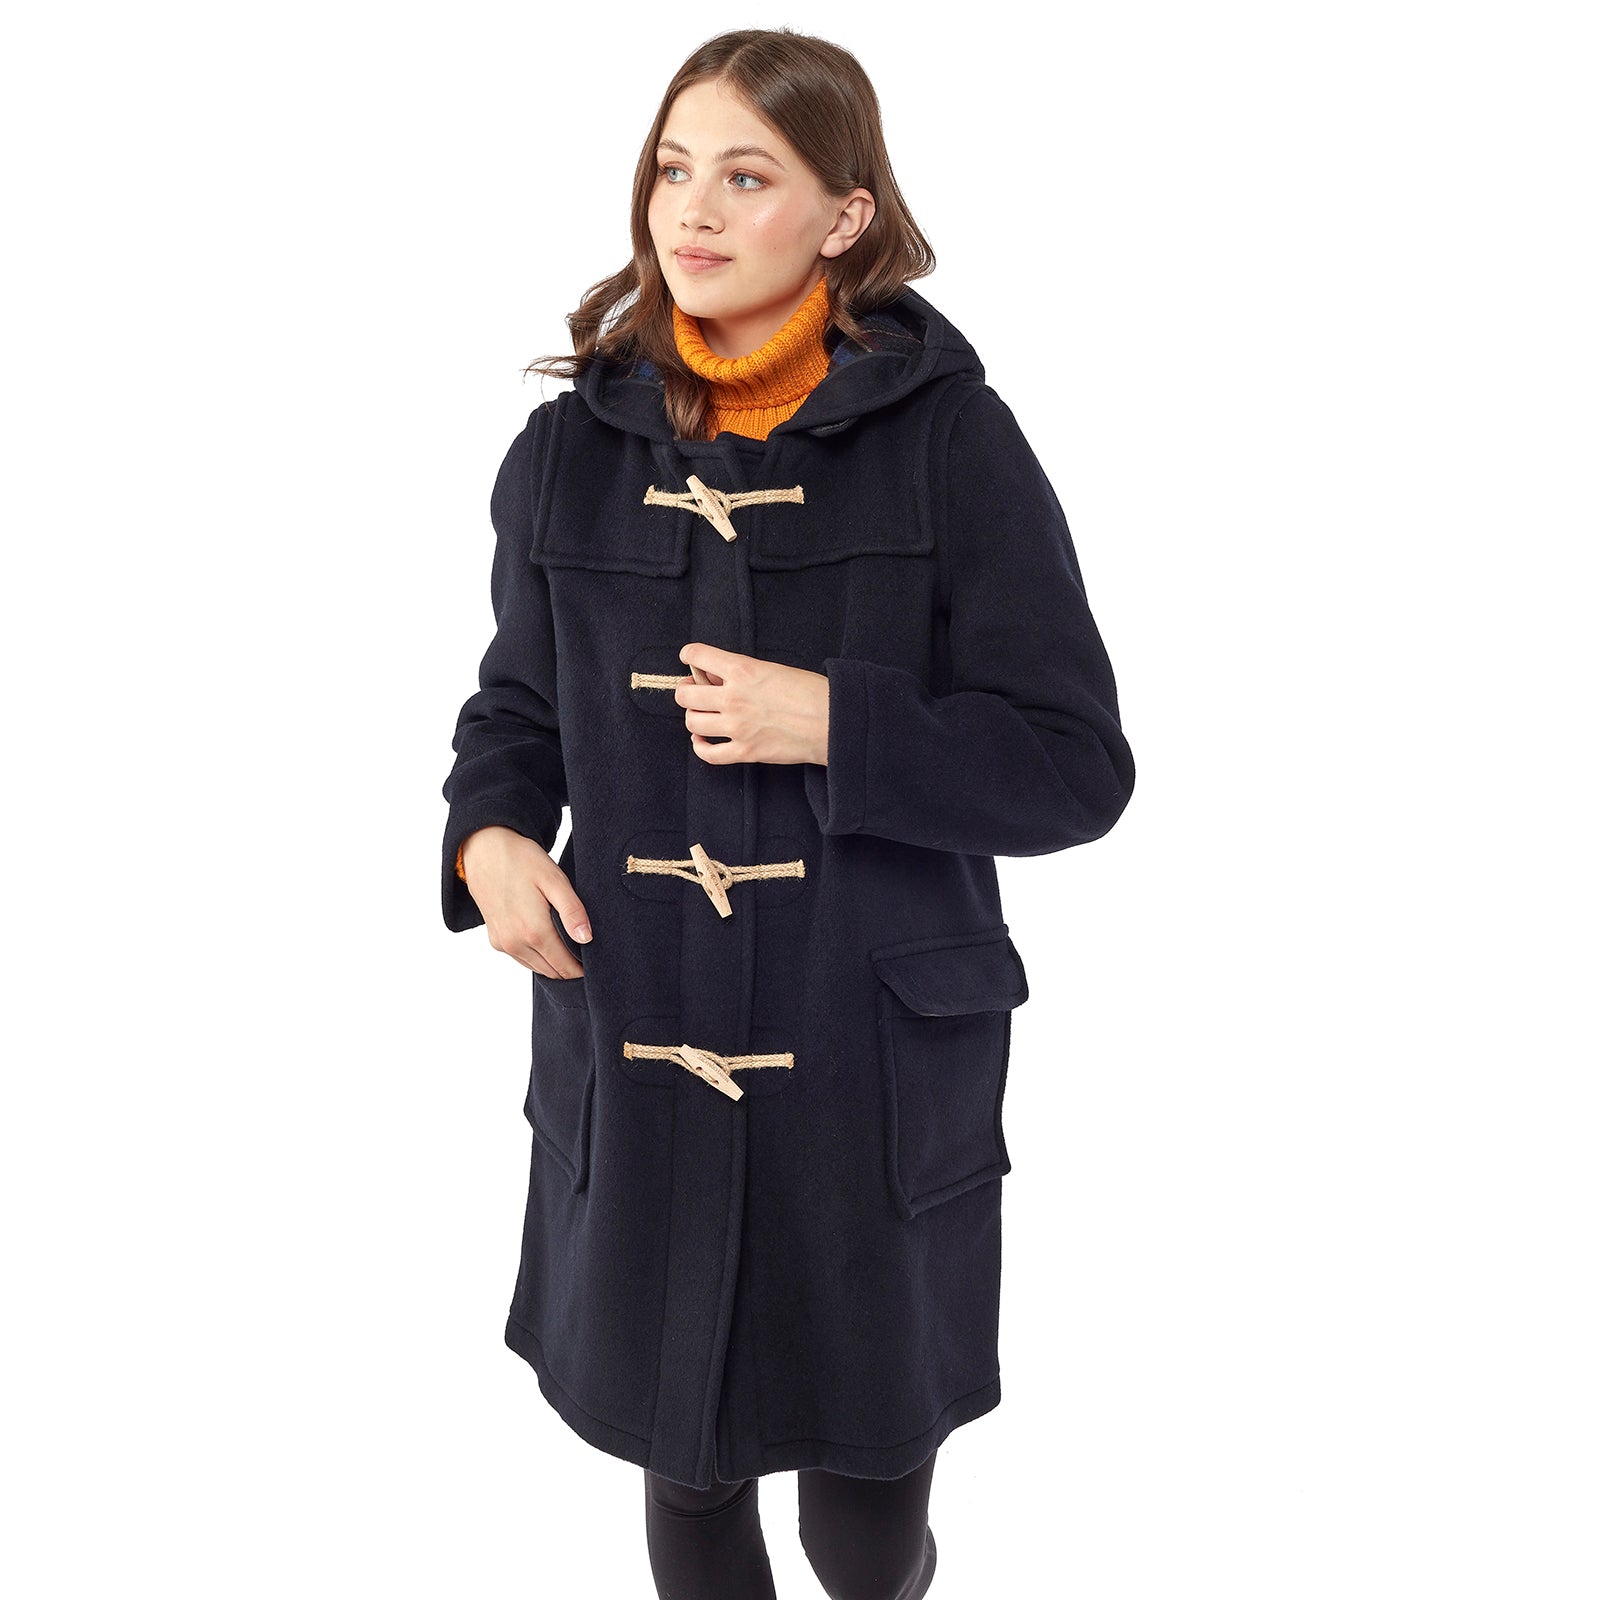 Women's Classic Fit Duffle Coat with Wooden Toggles | Original ...